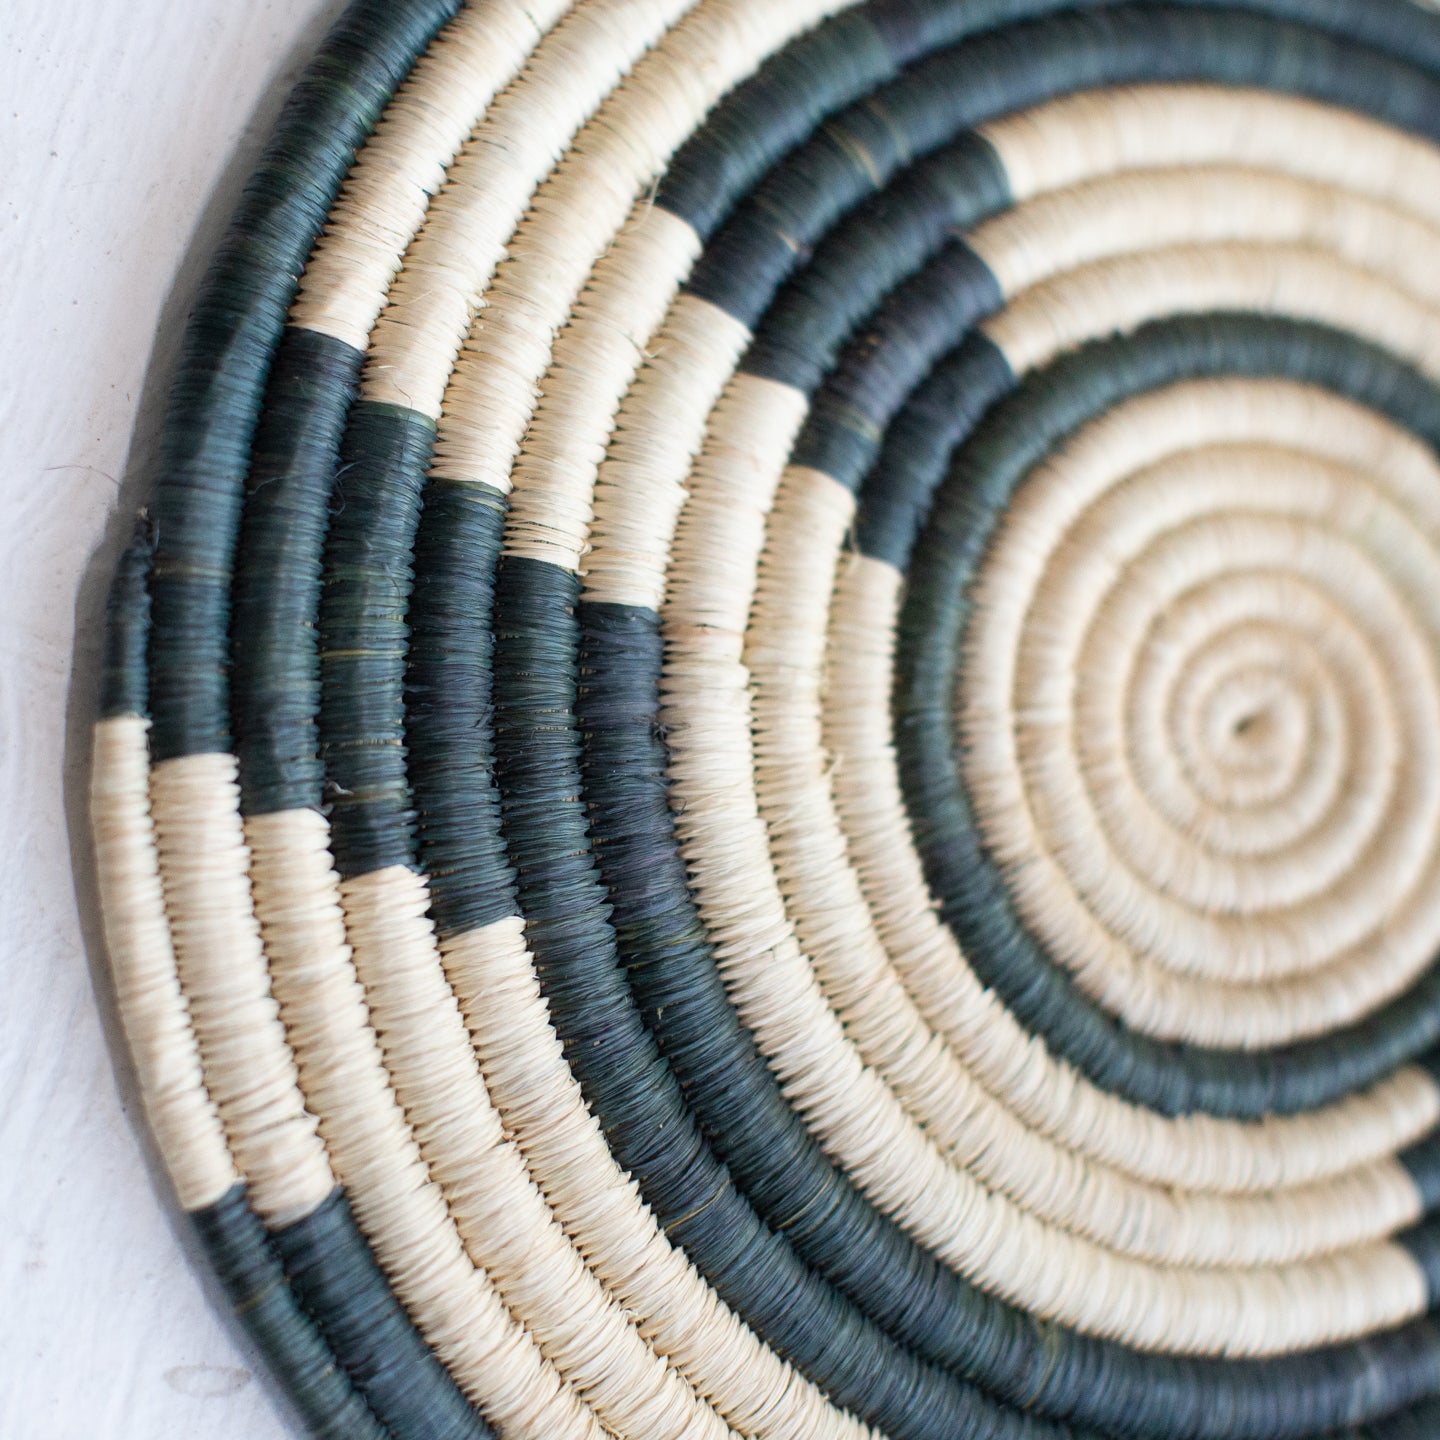 JustOne's large flat basket with tan and dark green twisting around the circle, handwoven in Uganda